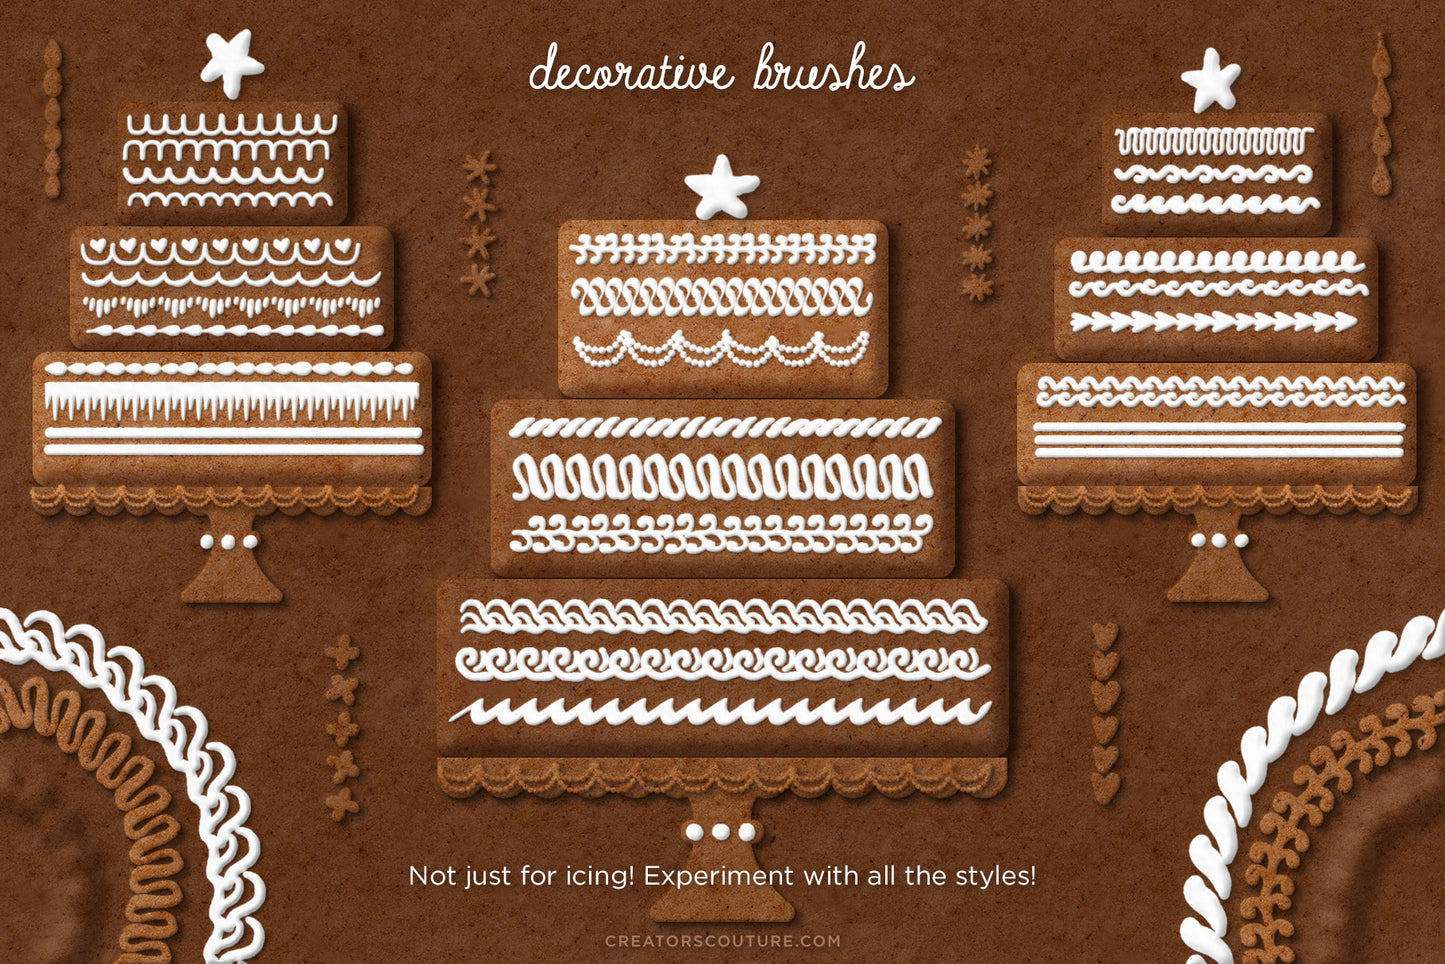 Gingerbread, Cookie, & Cake Graphic & Lettering Effects for Photoshop, icing decorative brushes